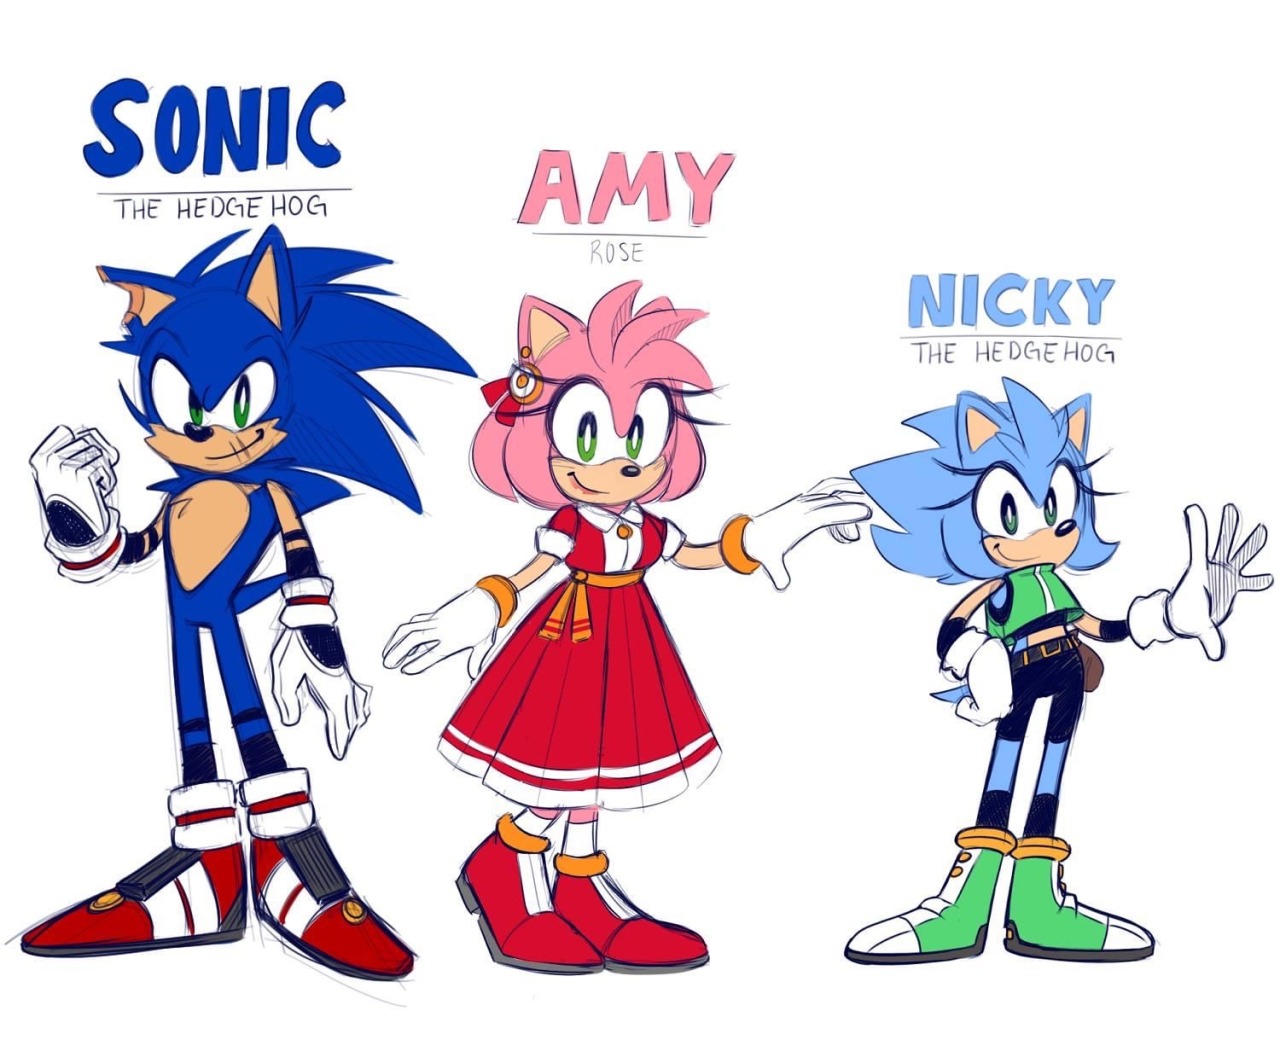 The Next Generation — I wanted to draw my sonamy fanchilds with their